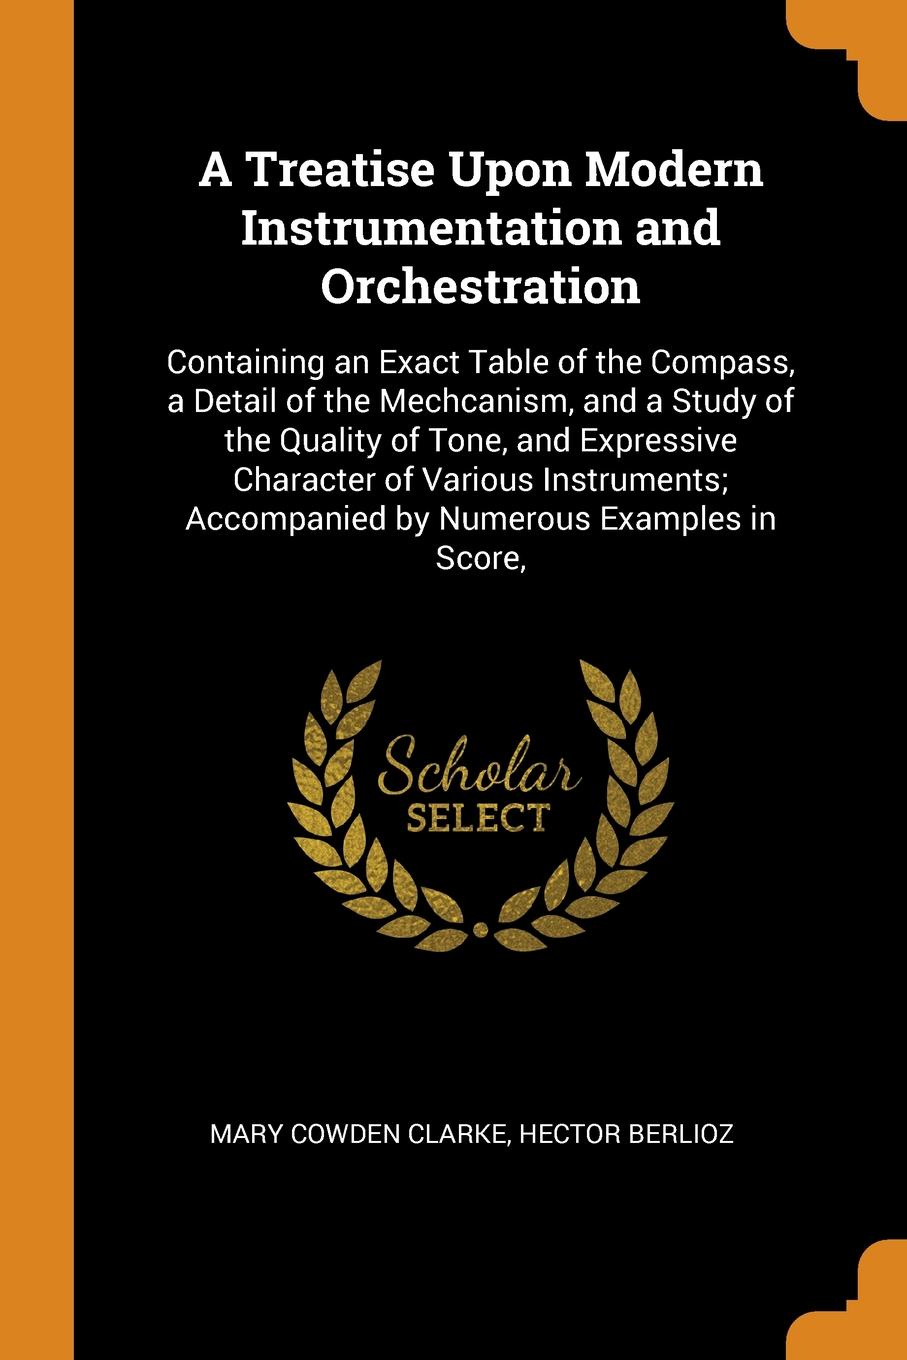 A Treatise Upon Modern Instrumentation and Orchestration. Containing an Exact Table of the Compass, a Detail of the Mechcanism, and a Study of the Quality of Tone, and Expressive Character of Various Instruments; Accompanied by Numerous Examples i...